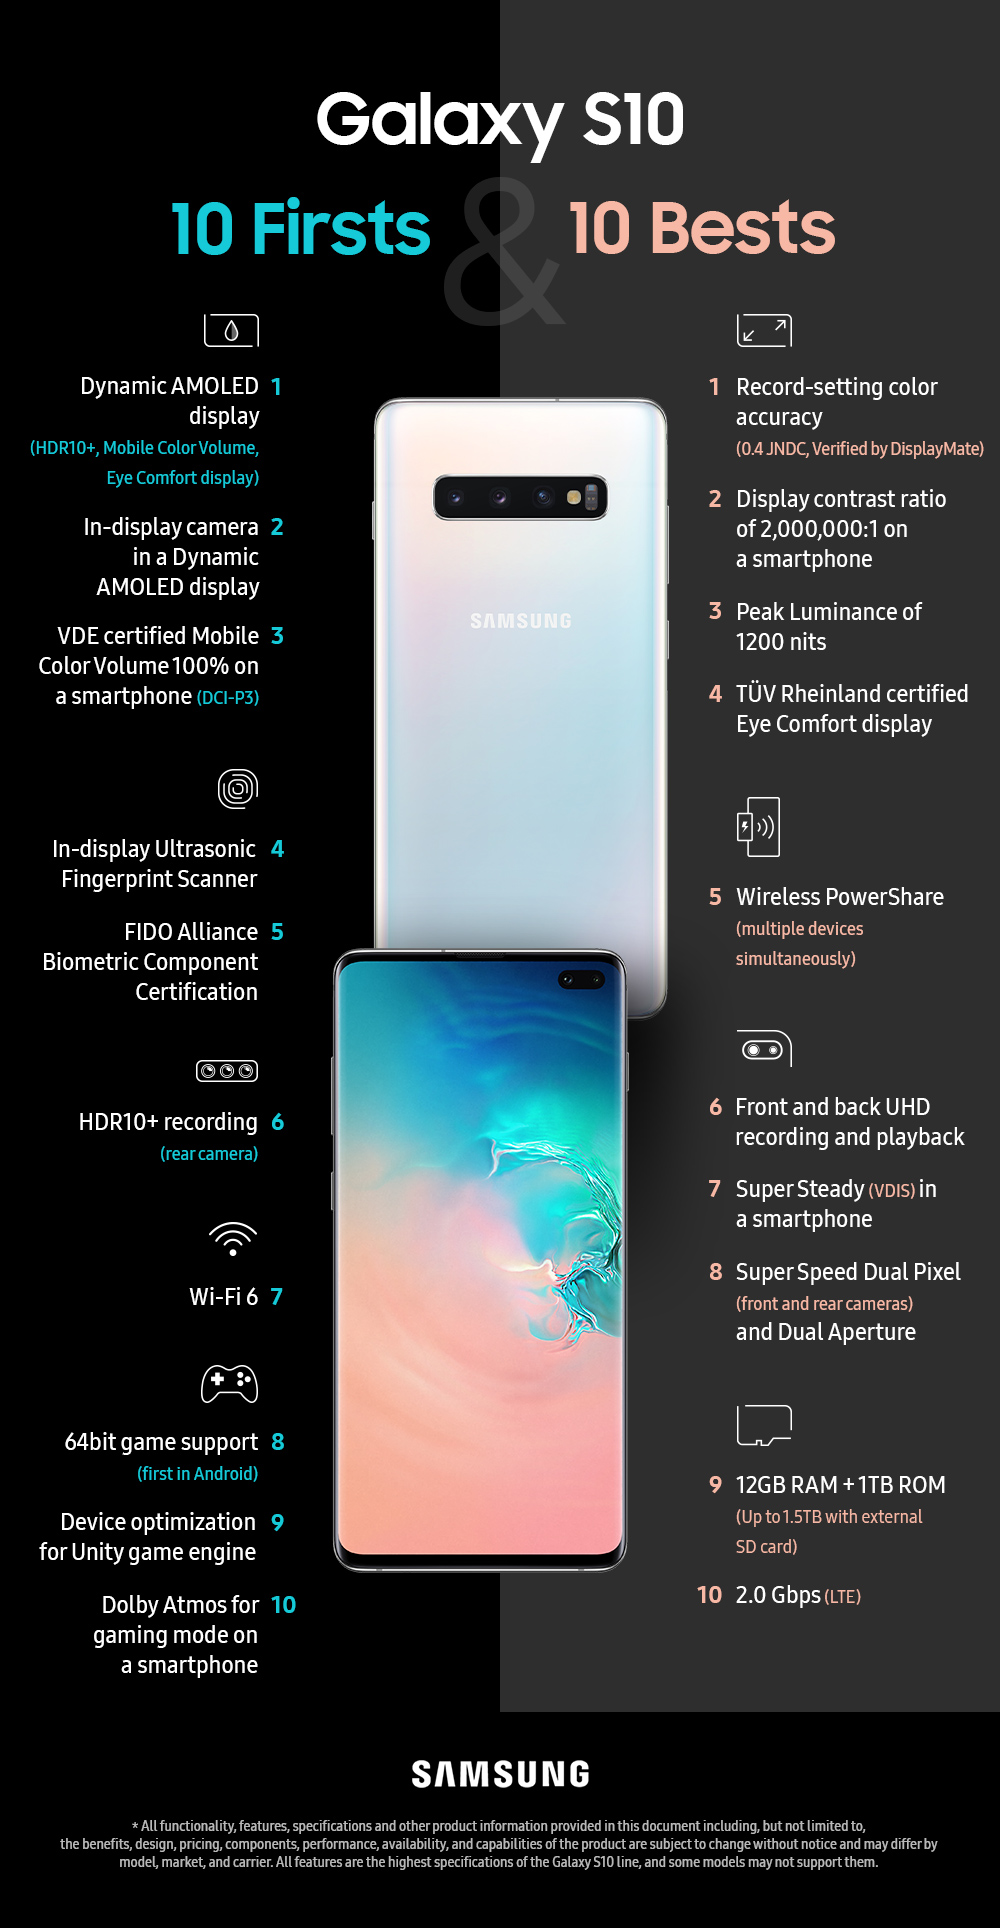 [Infographic] 10 Firsts and 10 Bests from the Galaxy S10